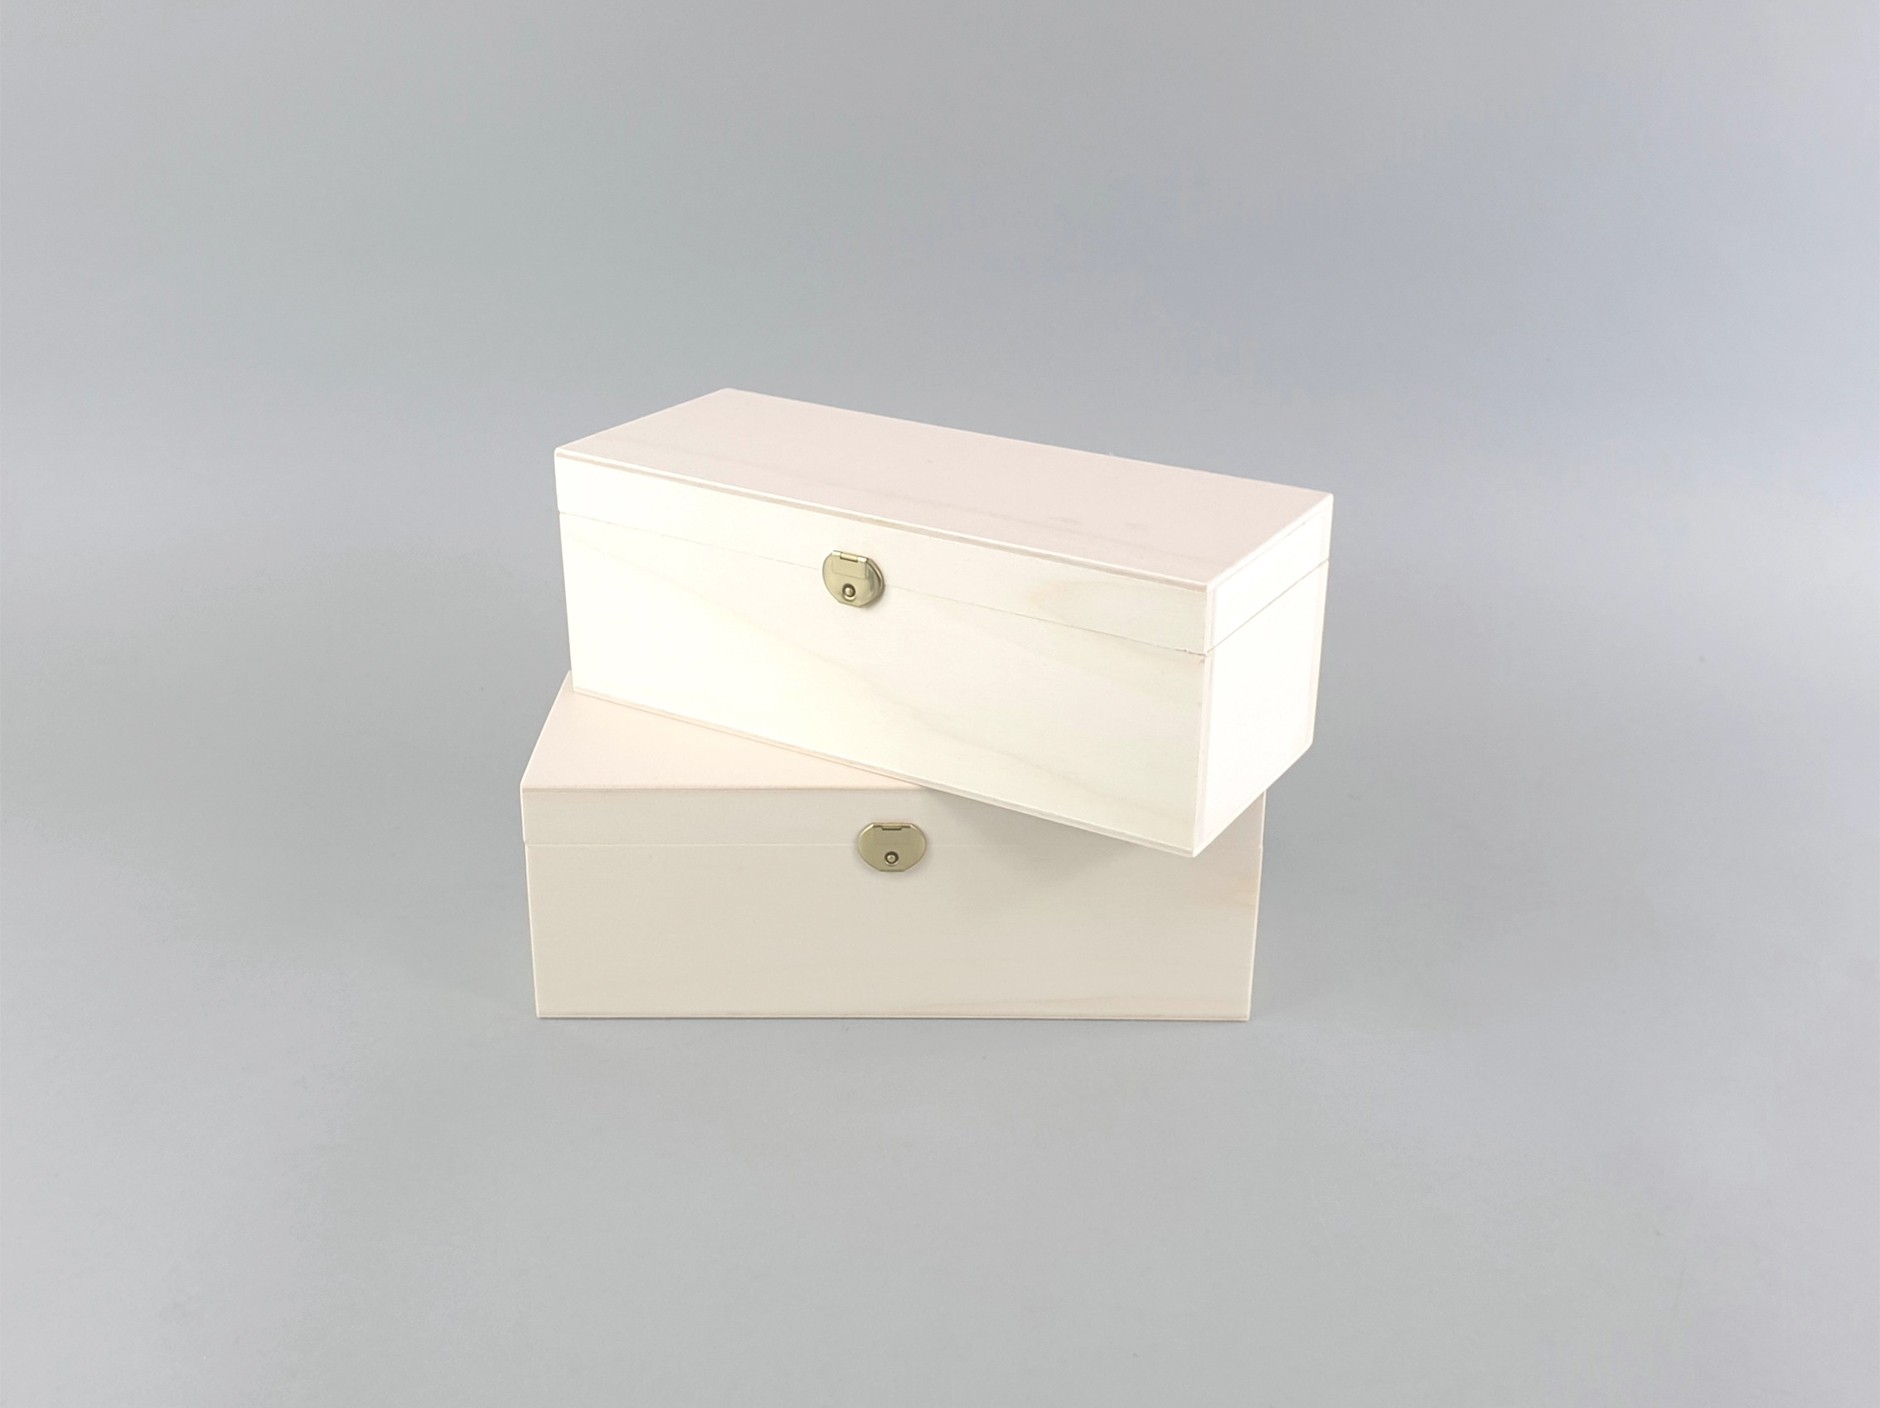 Wooden box 27x11x10 cm. with hinge and clasp Ref.C42